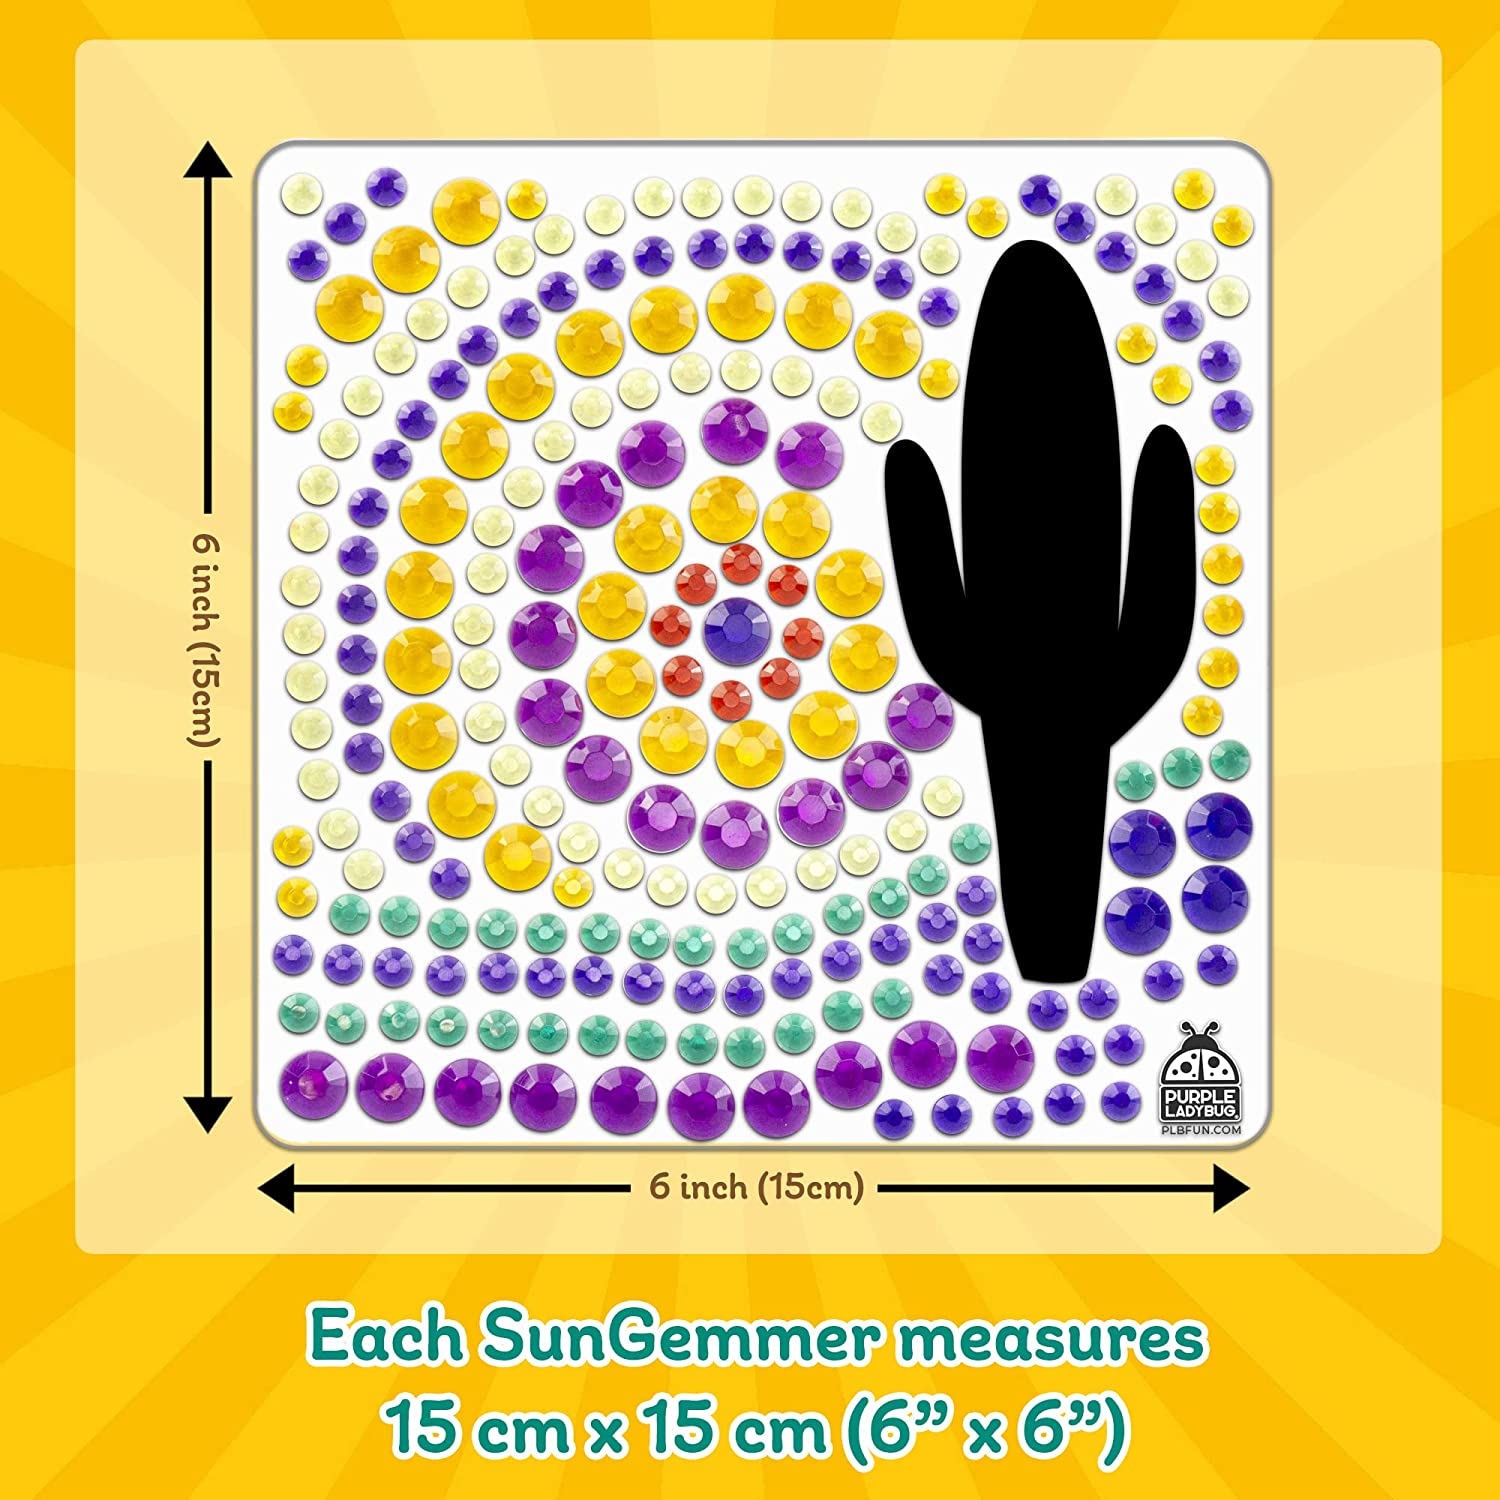 SUNGEMMERS Suncatcher Kits - Gem Art Diamond Painting Crafts for Kids Ages 8-12 - Fun Gifts for Girls, Arts and Crafts for Boys